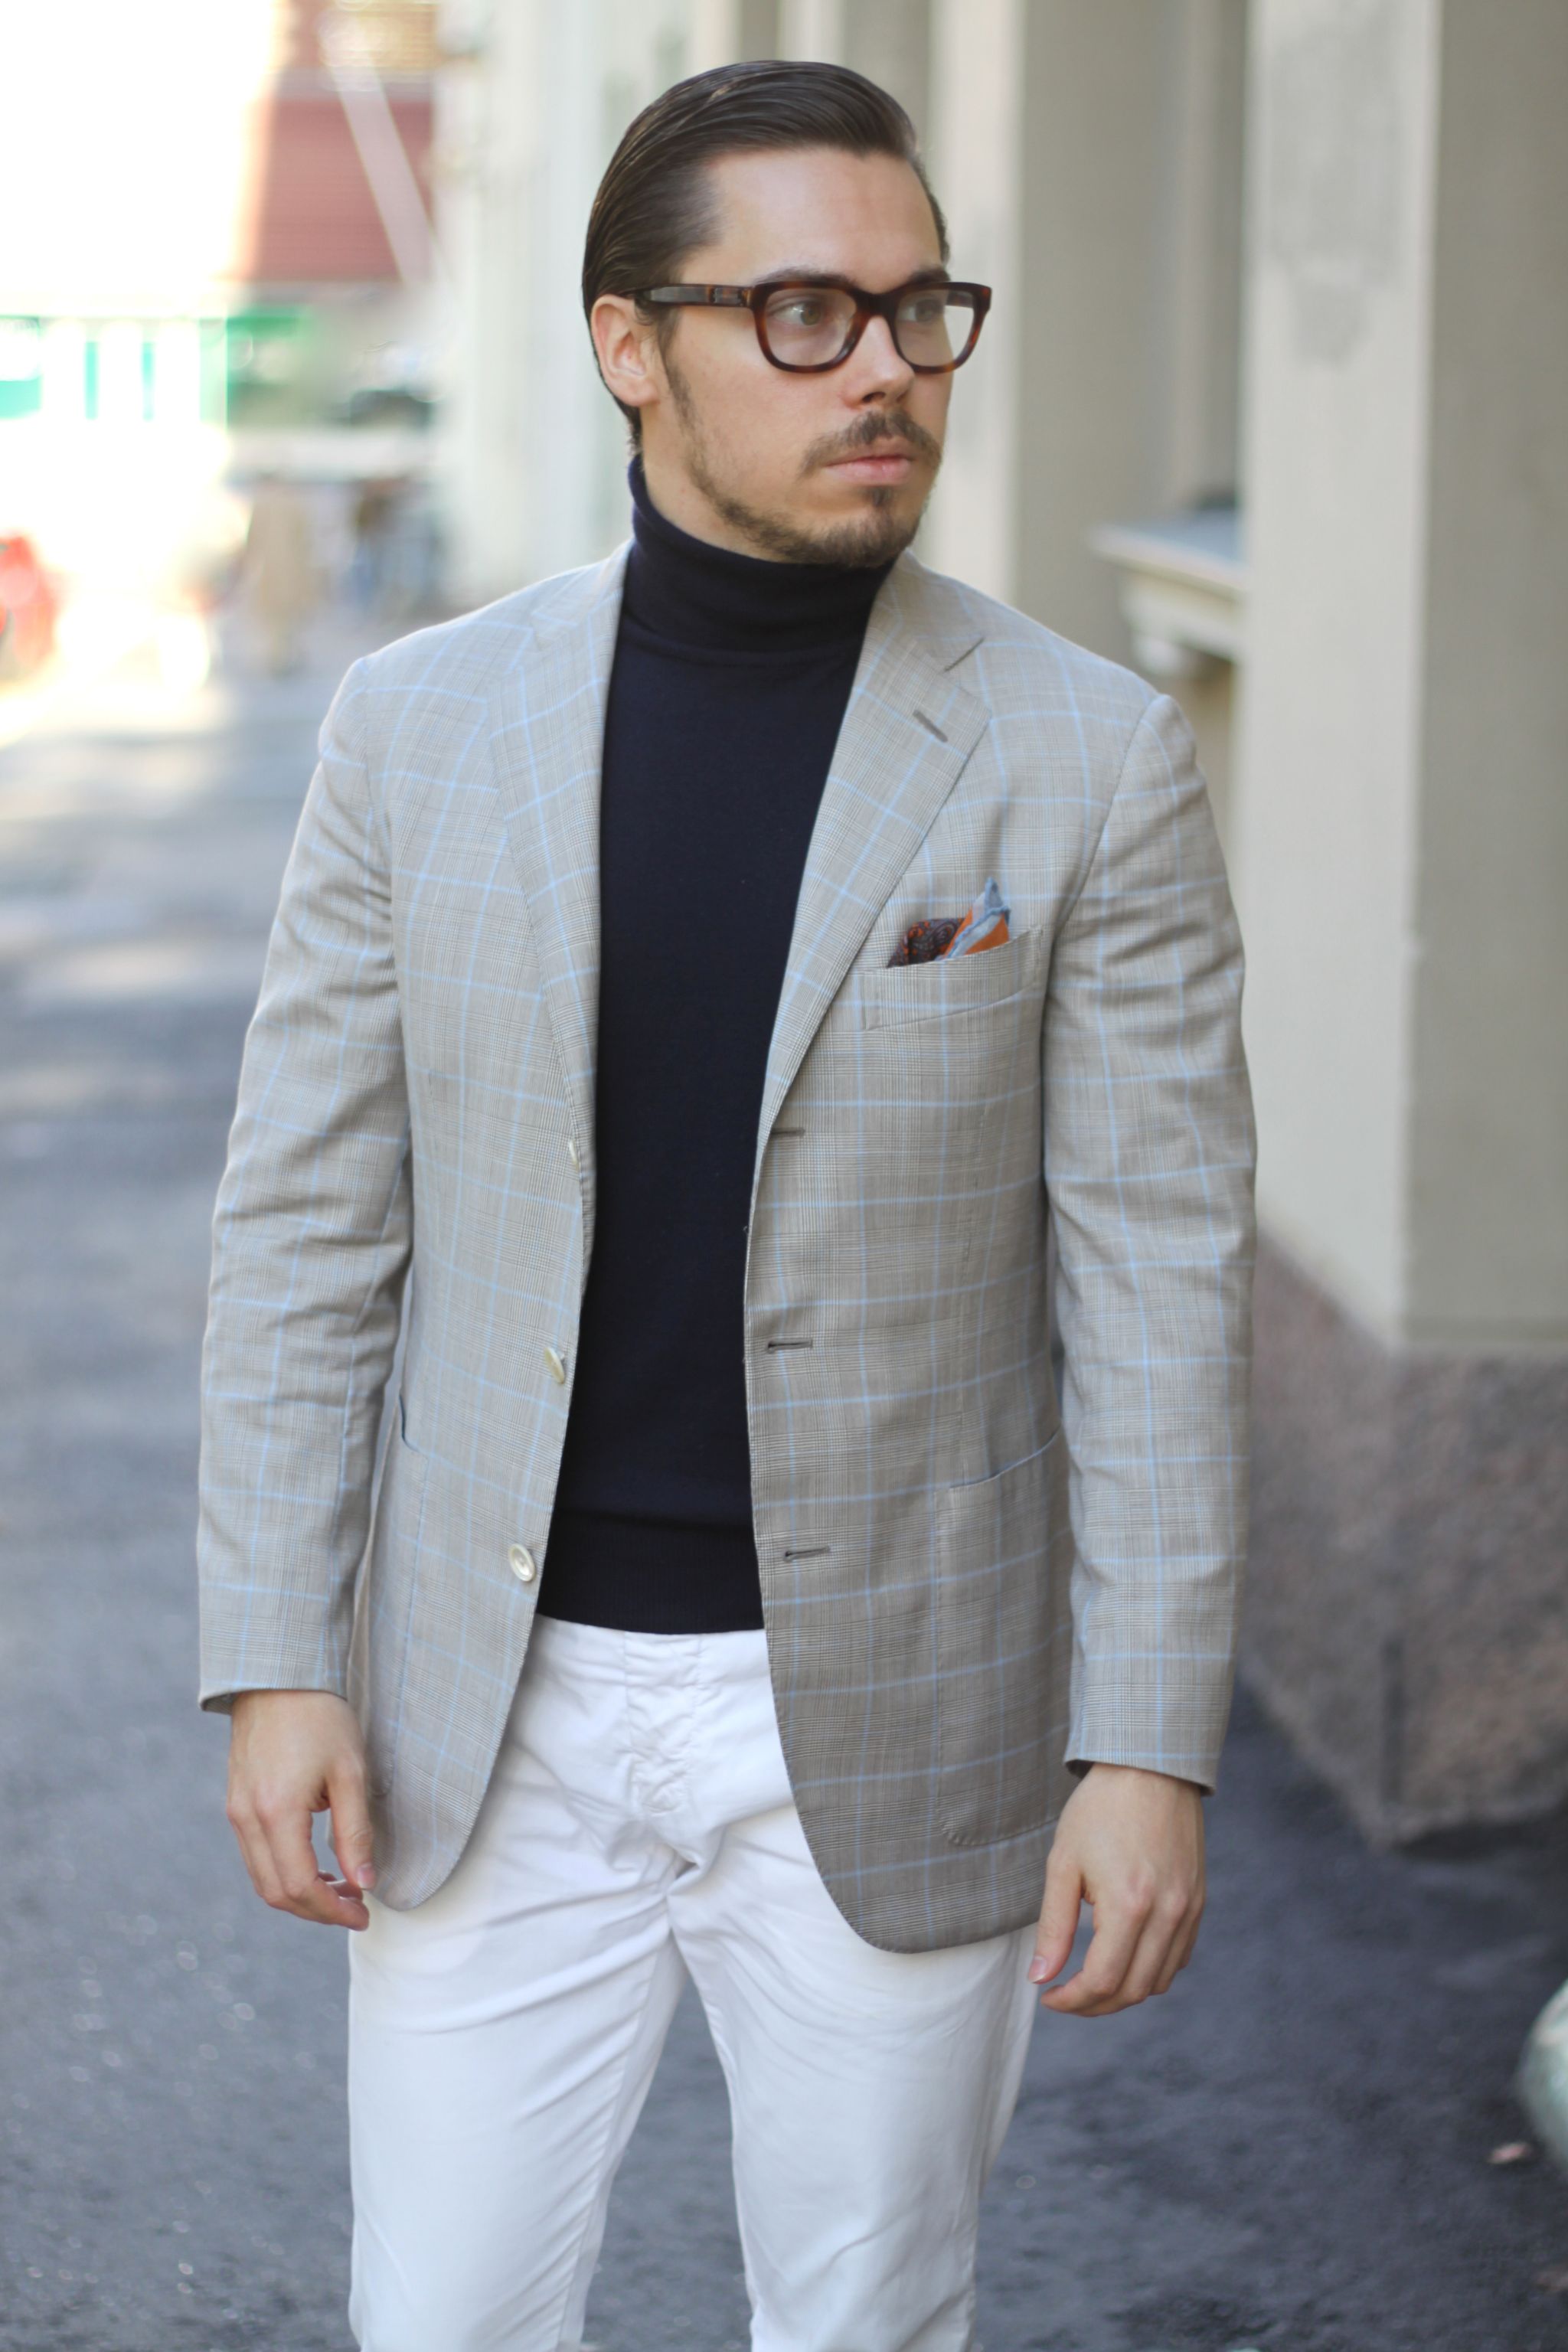 Sport coat with roll neck sweater and cotton slacks